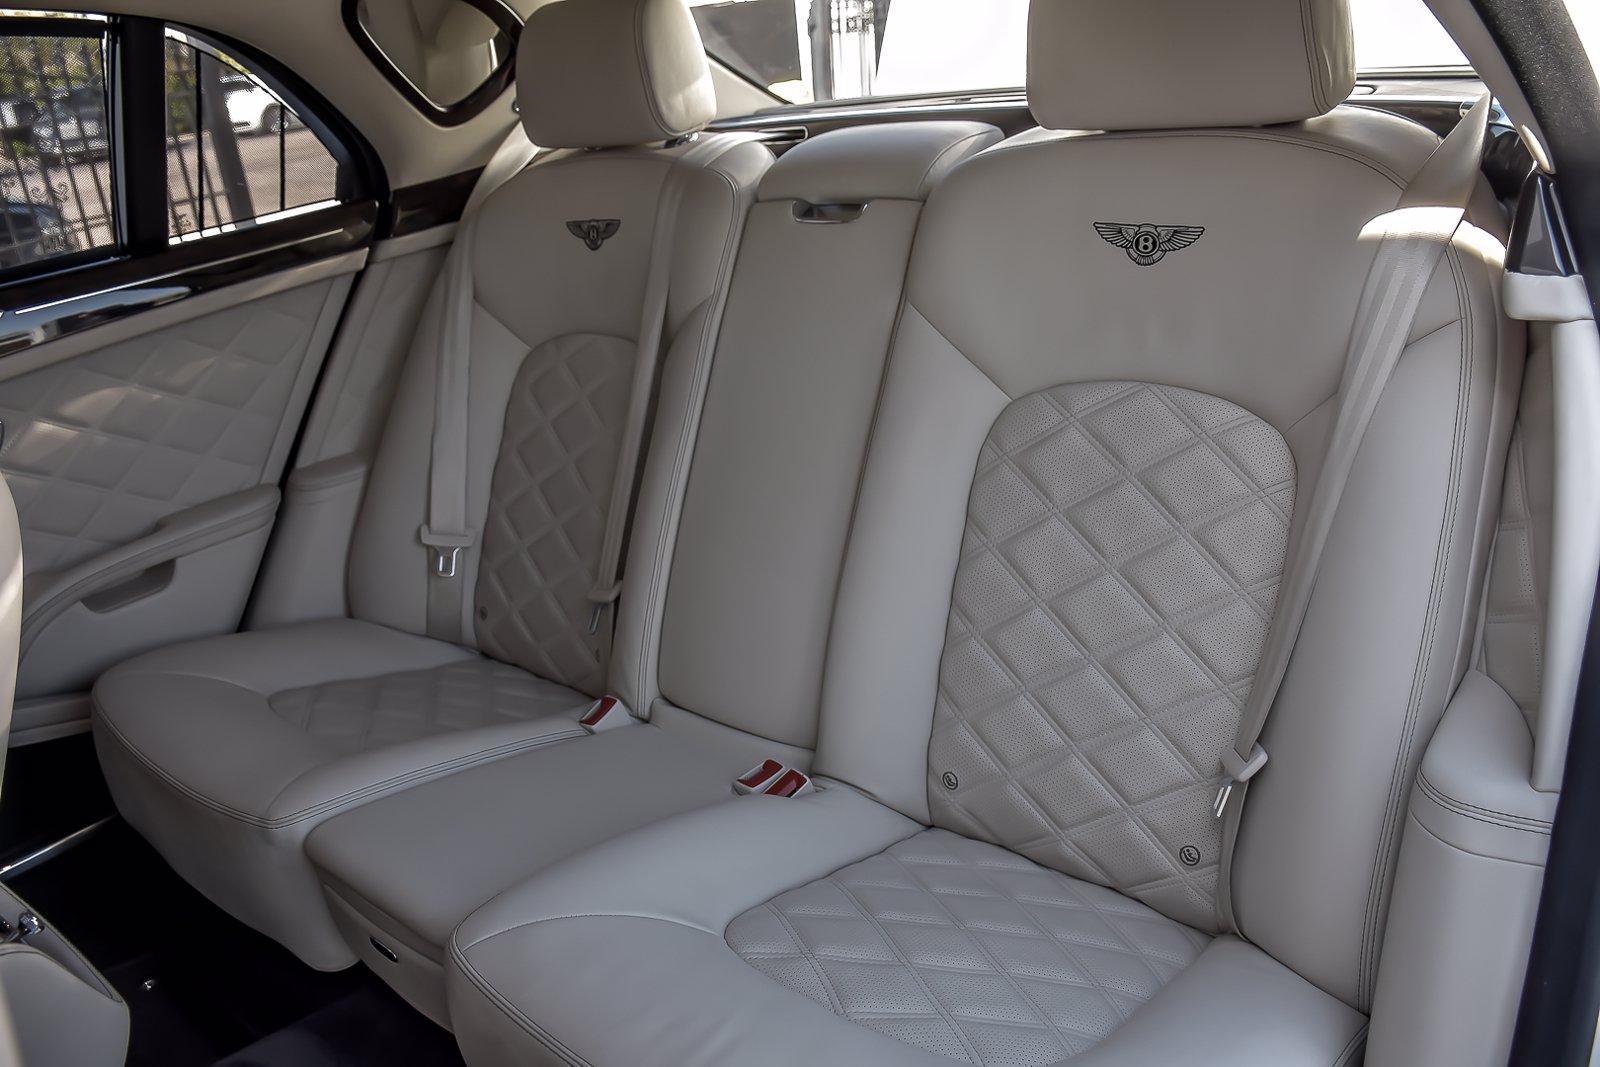 Used 2013 Bentley Mulsanne Premier, Mulliner, Naim, Rear Ent | Downers Grove, IL